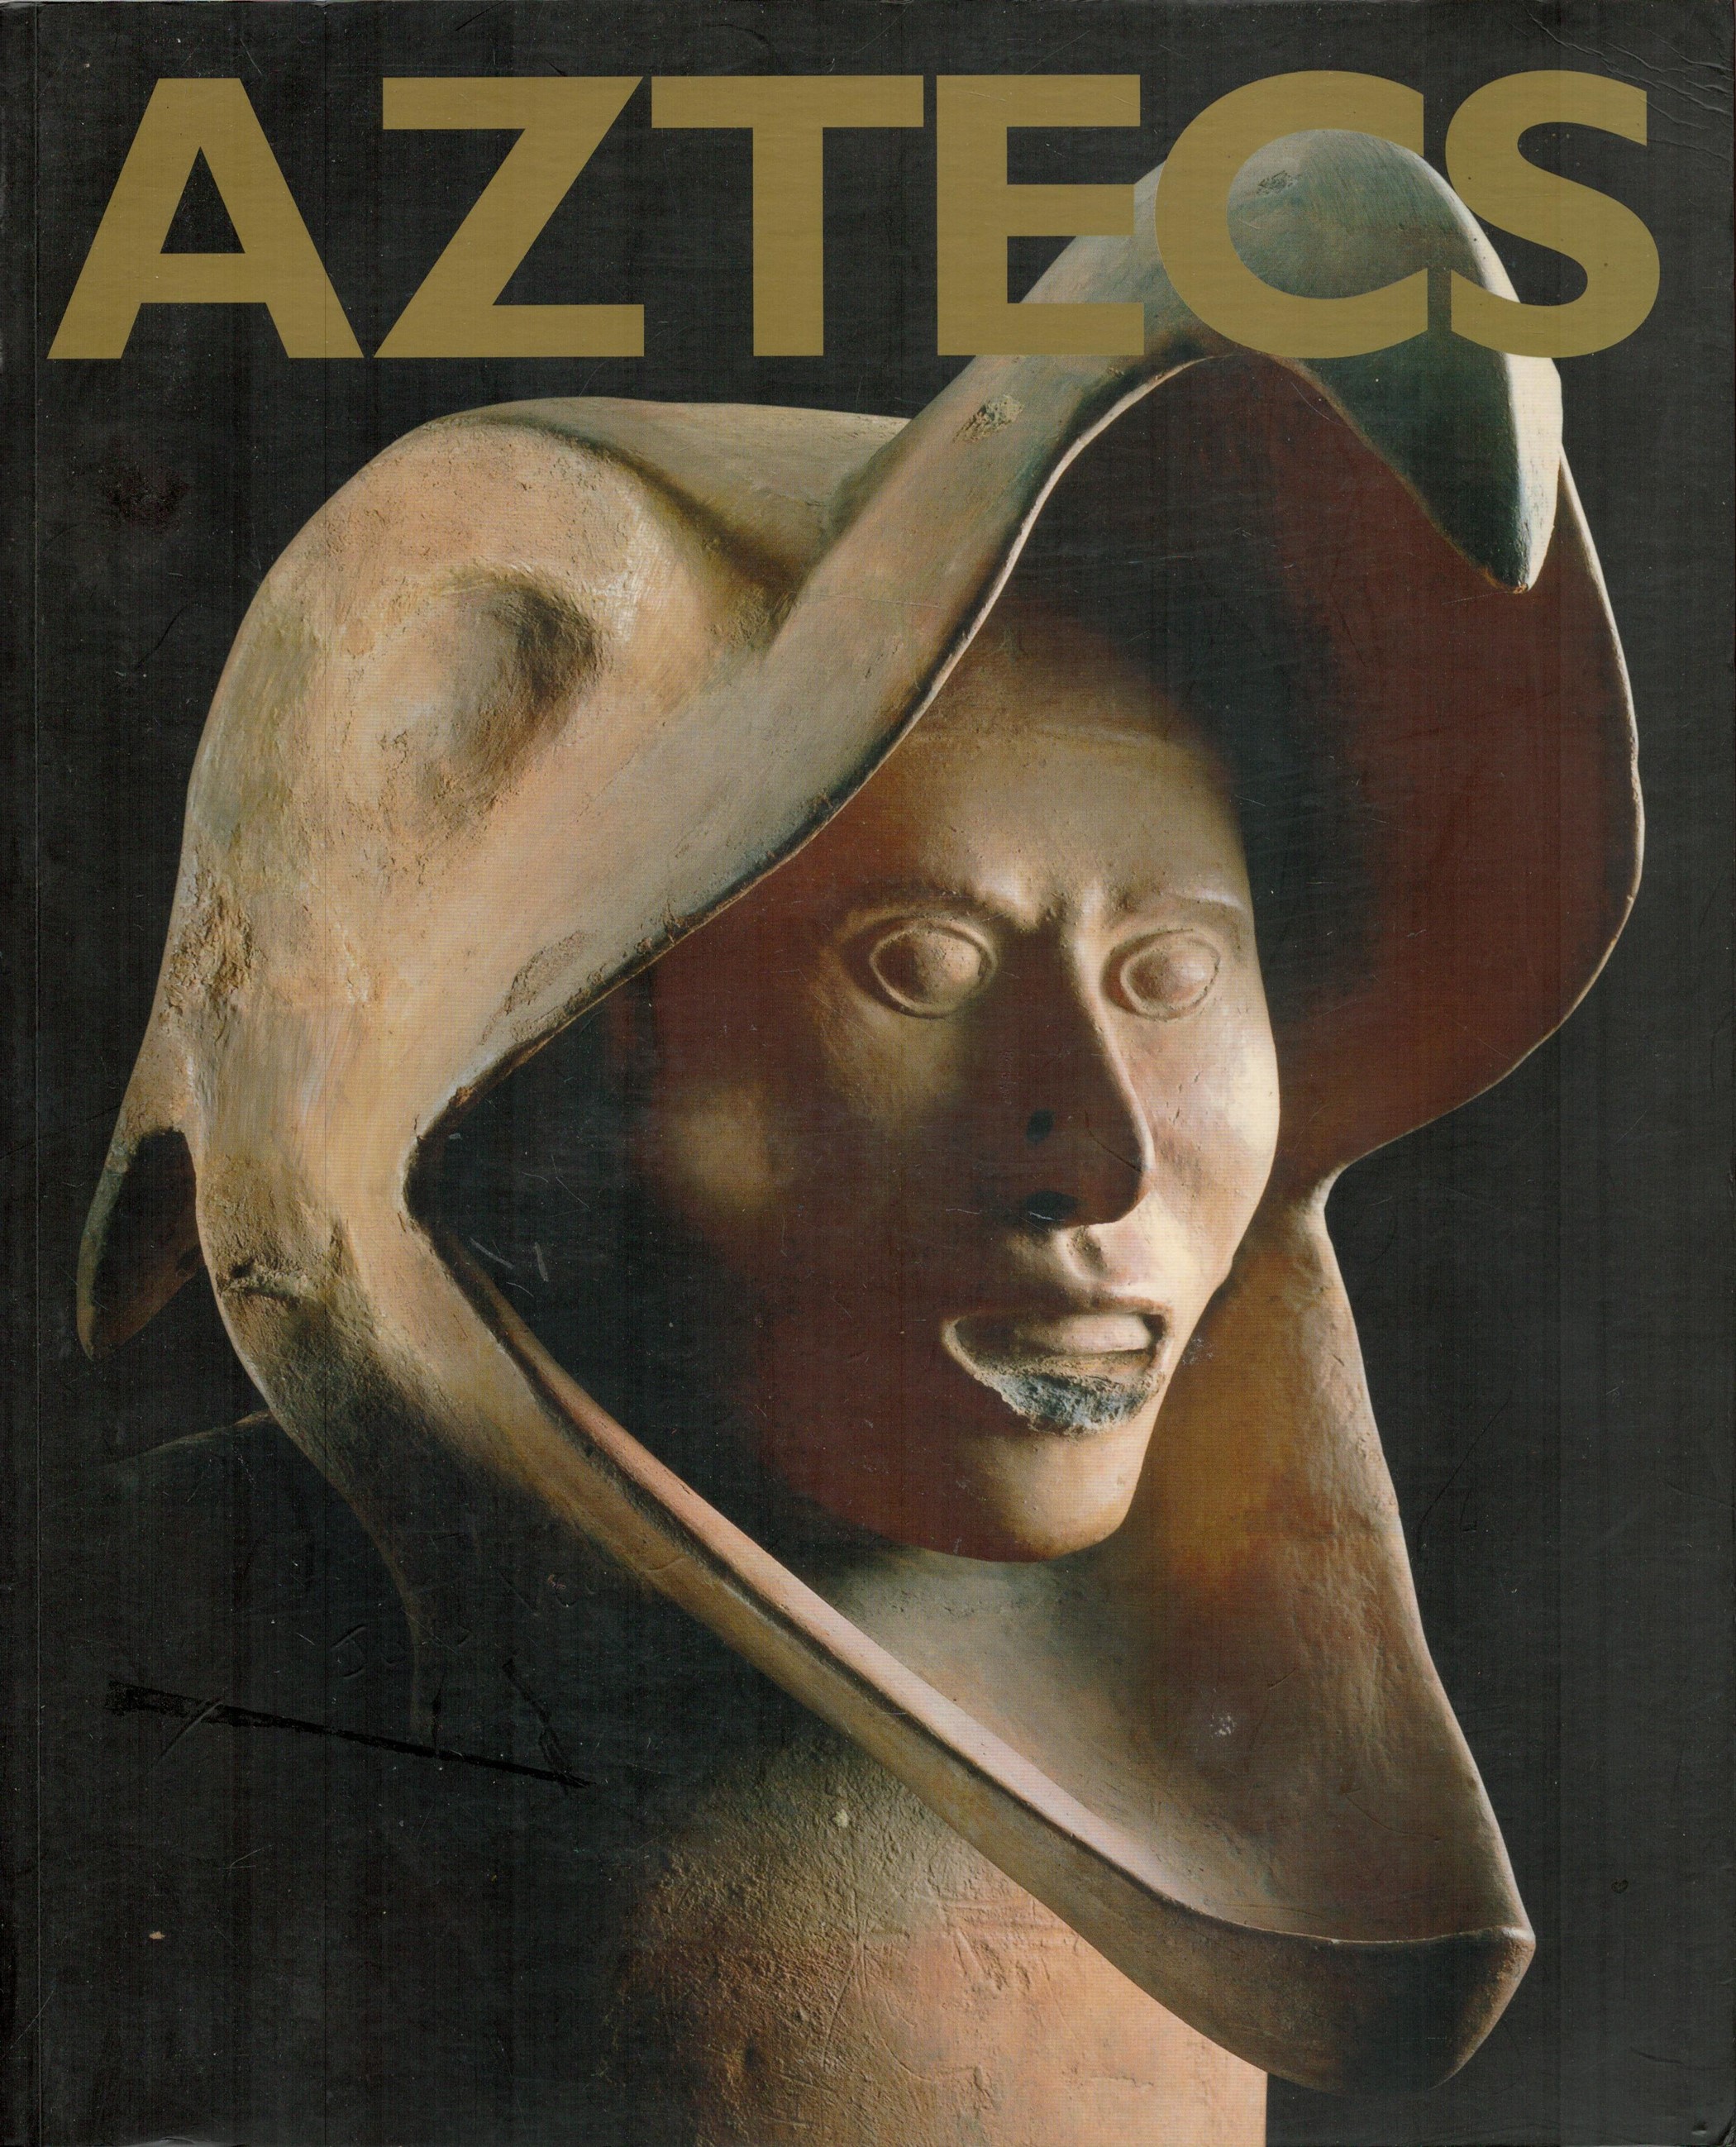 Aztecs edited by Michael Foster 2003 First Edition Softback Book with 520 pages published by Royal